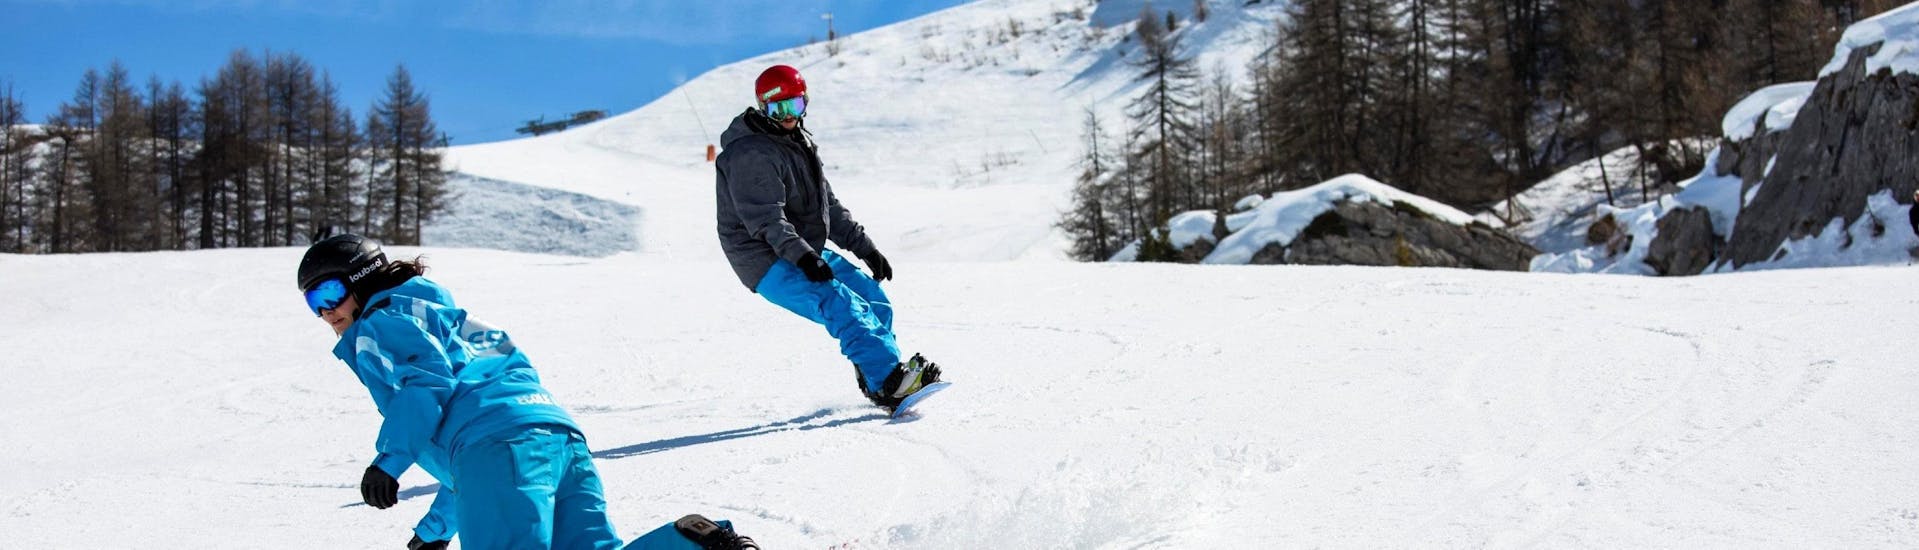 private-snowboarding-lessons-from-8-years-high-season-esi-pra-loup-hero